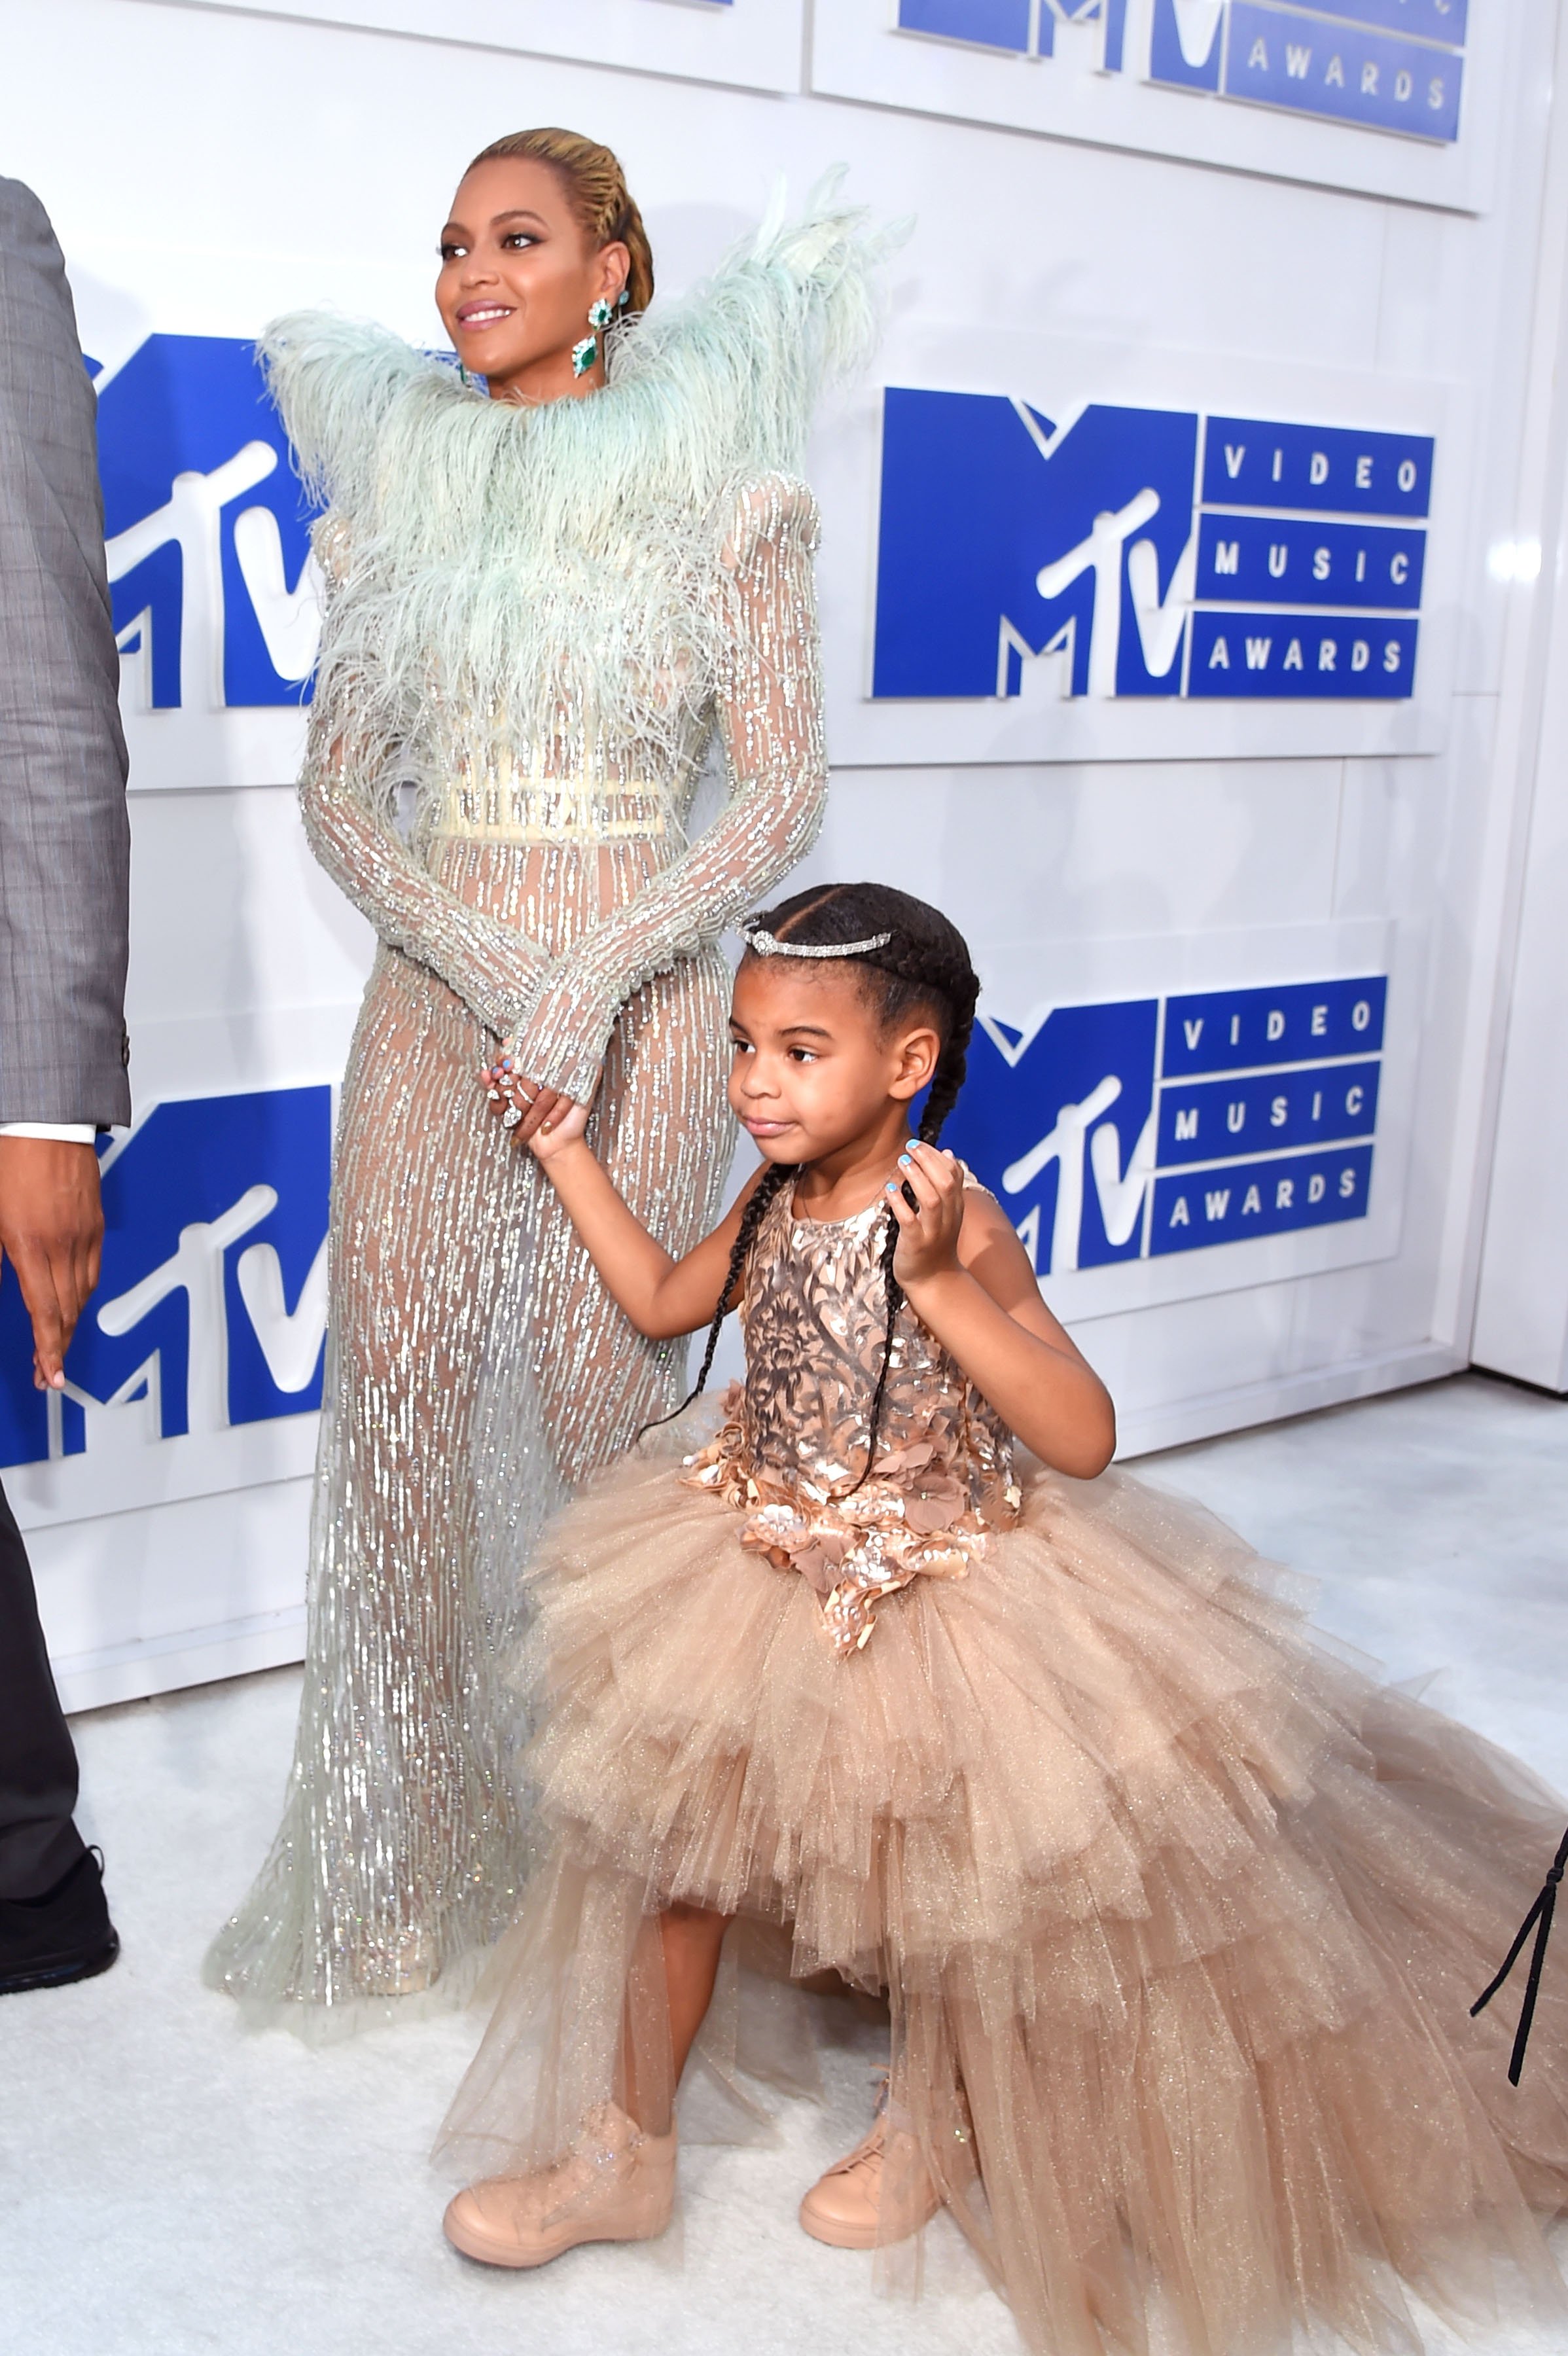 Beyonce and Blue Ivy at the 2016 MTV Video Music Awards in New York City on Aug. 28, 2016 | Photo: Getty Images